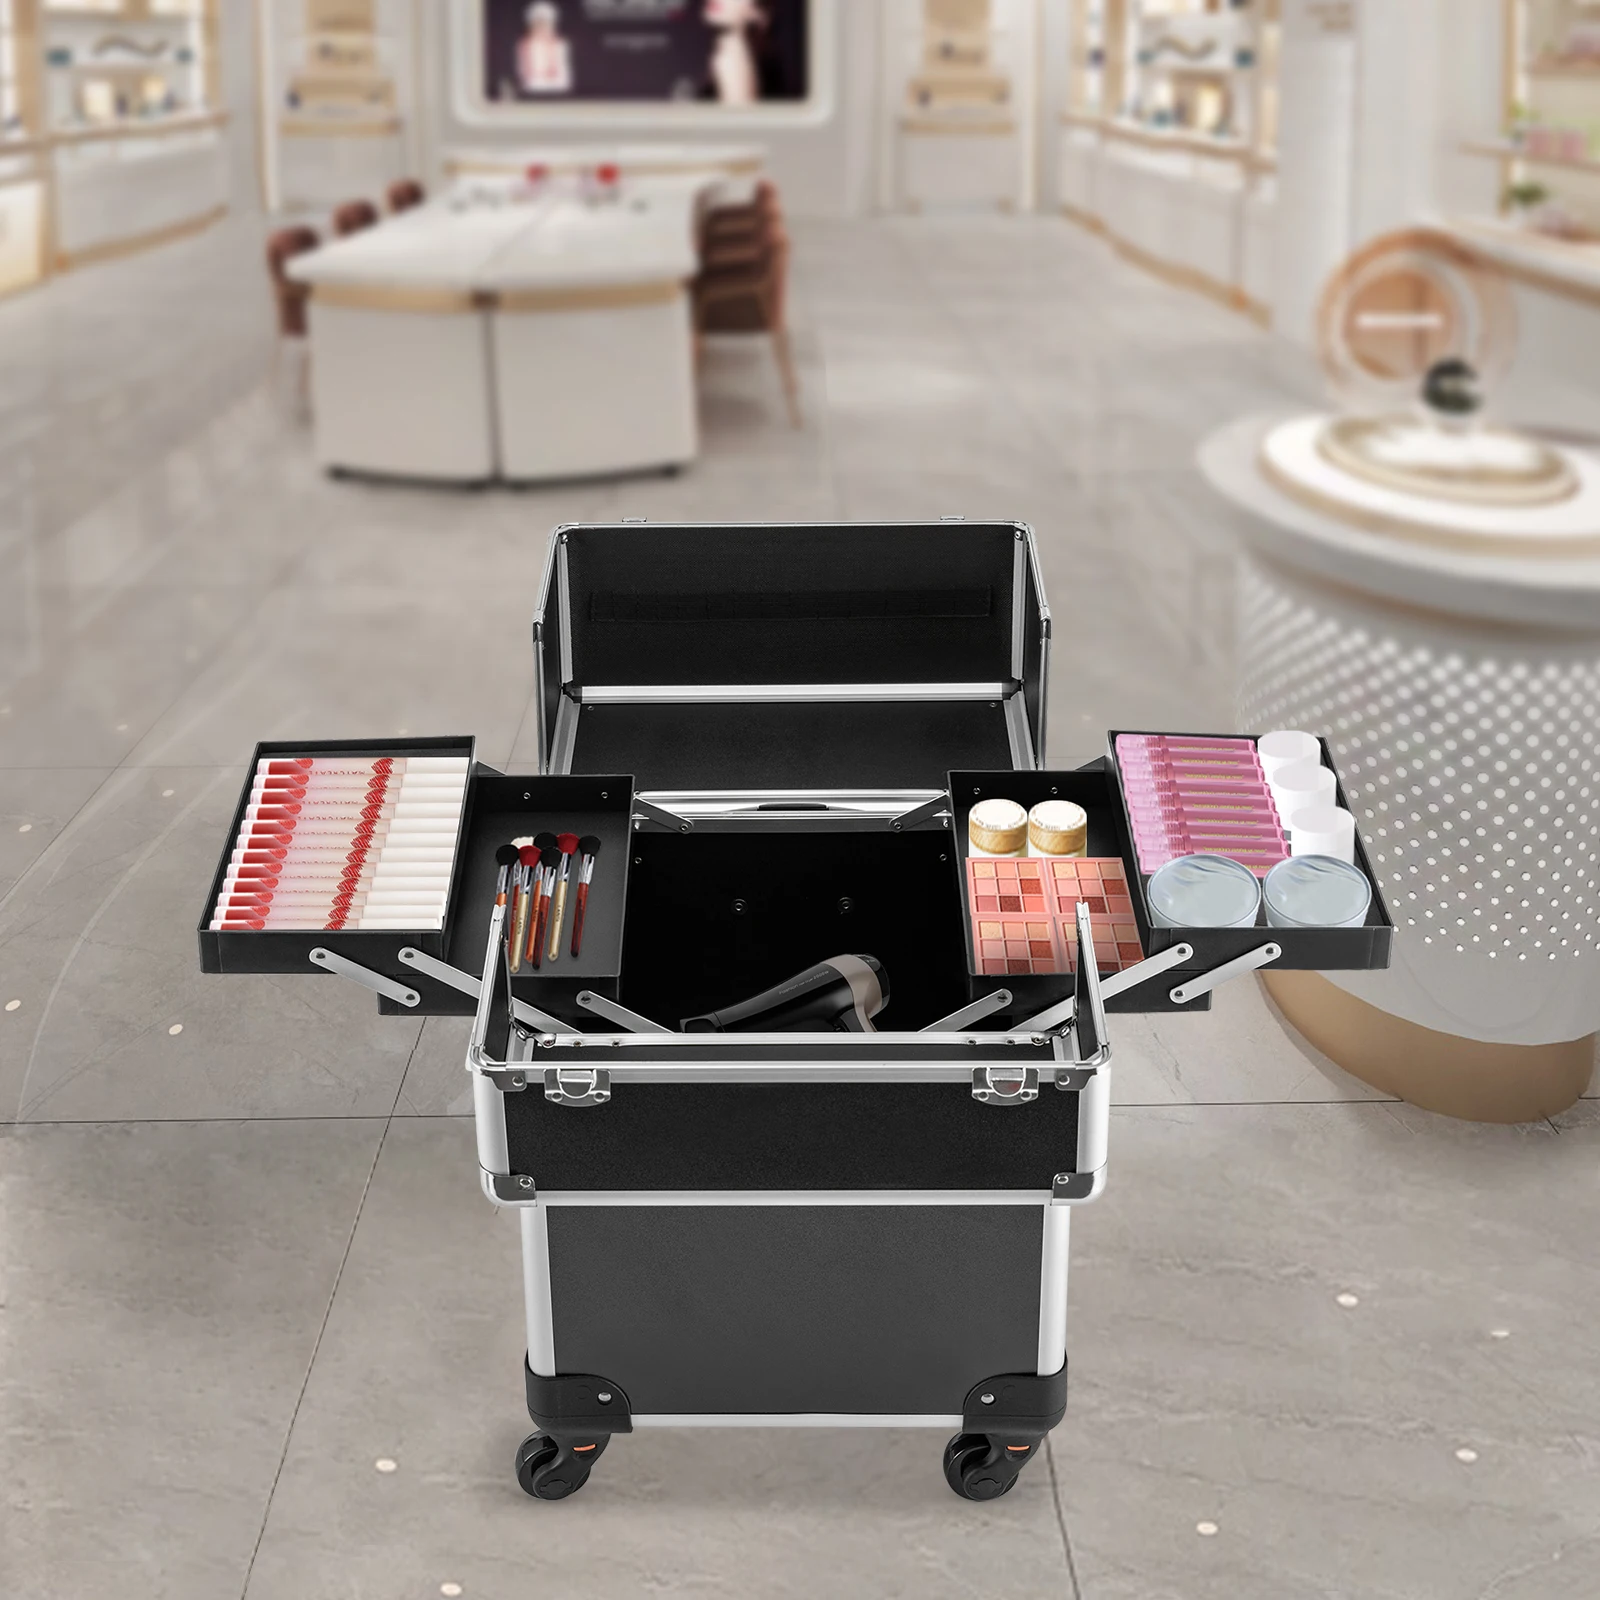 Cosmetics Makeup Trolley Case Rolling Train Case Organized Aluminum Barber Case for Hairstylist Makeup Nail Tech